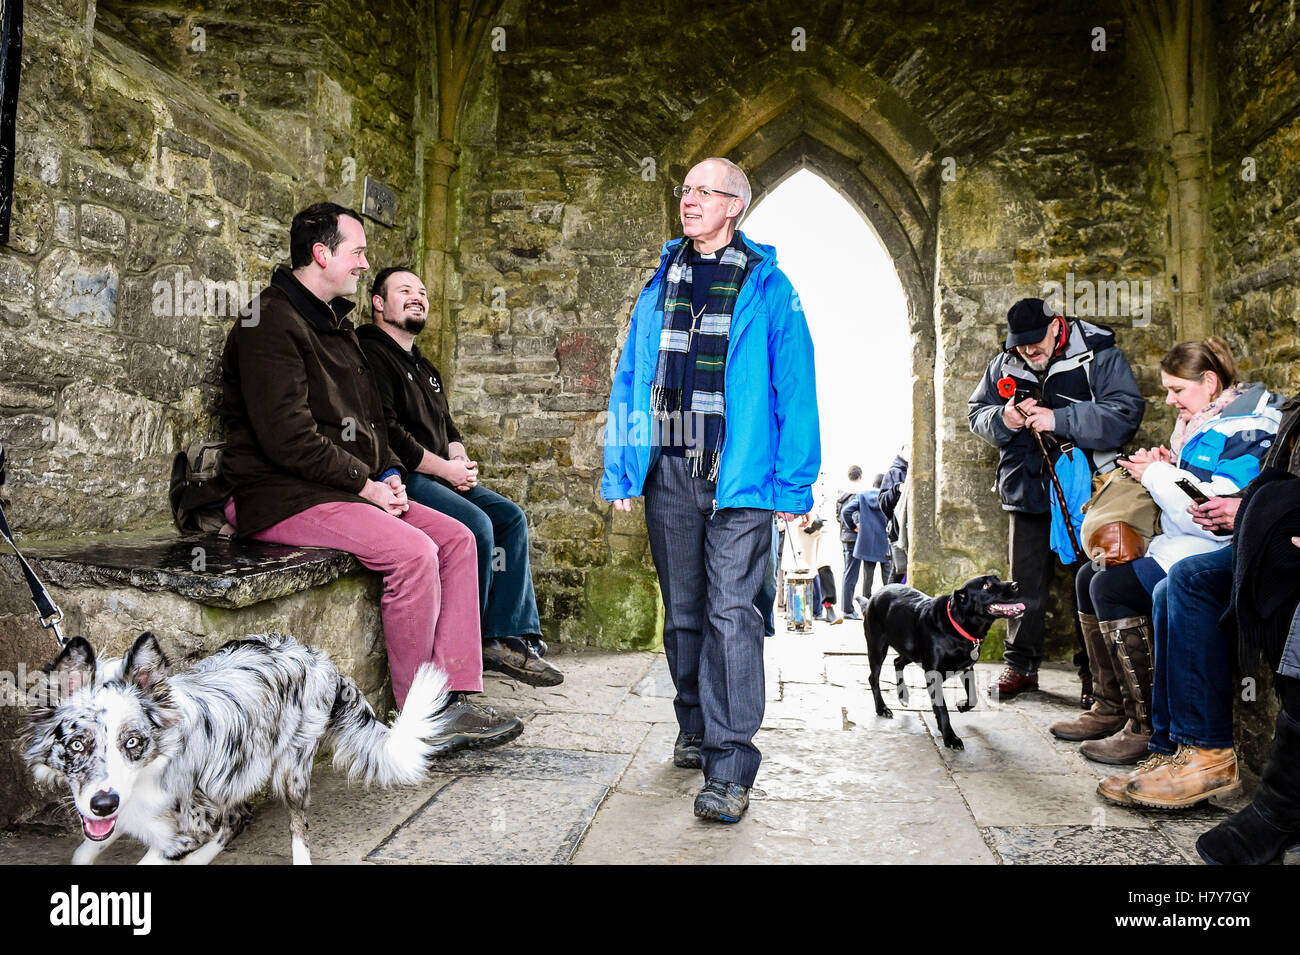 The Archbishop of Canterbury, the Most Rev Justin Welby inspects the interior of St Michael's Tower atop Glastonbury Tor accompanied by local clergy, parishoners and people of other faith and spiritual groups during his visit to the Somerset area. Stock Photo